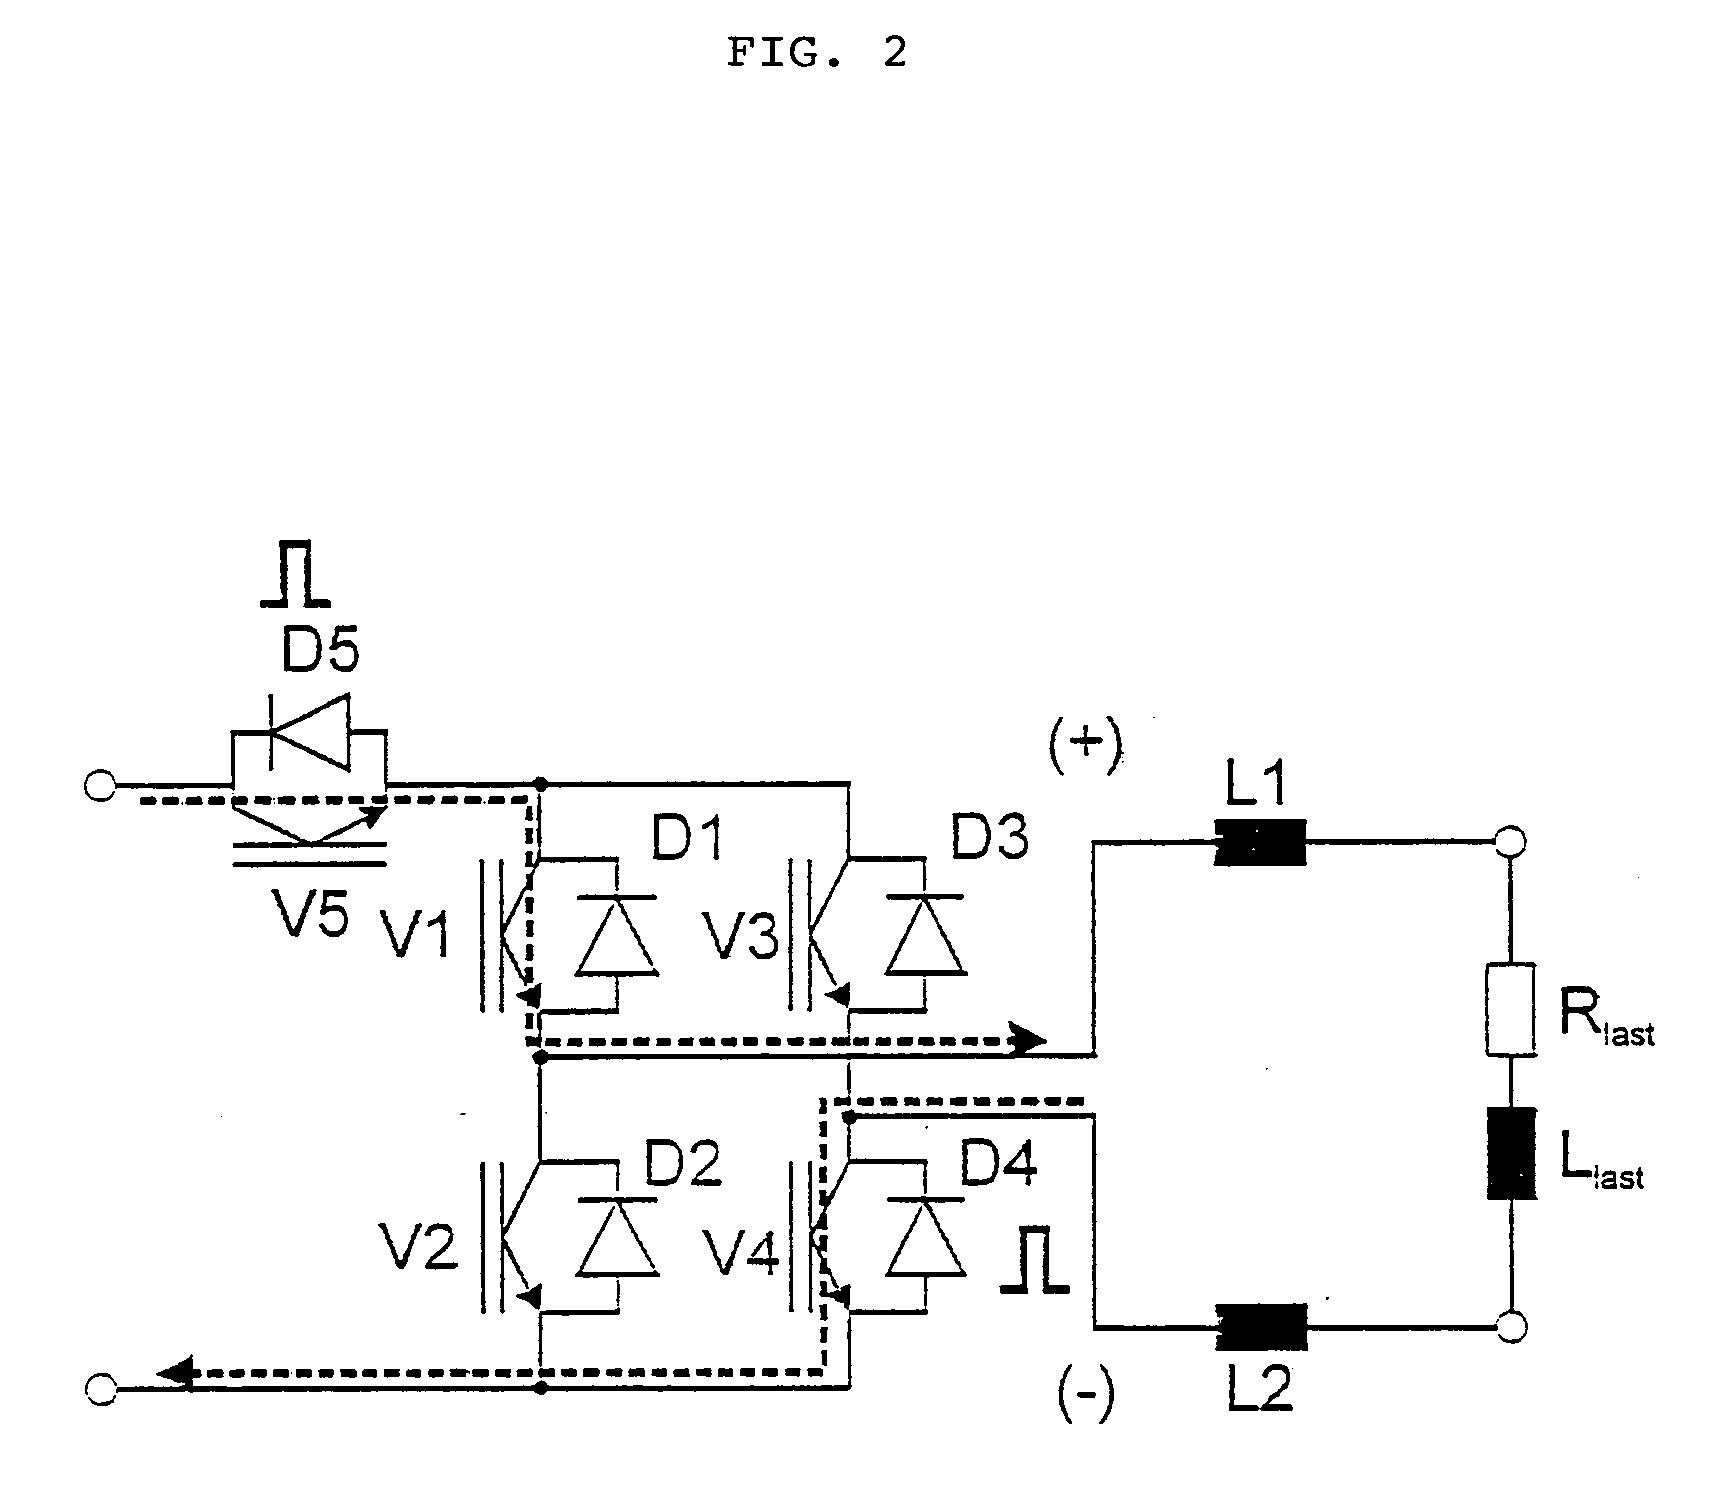 Method of converting a direct current voltage from a source of direct current voltage, more specifically from a photovoltaic couse of direct current voltage, into a alternating current voltage